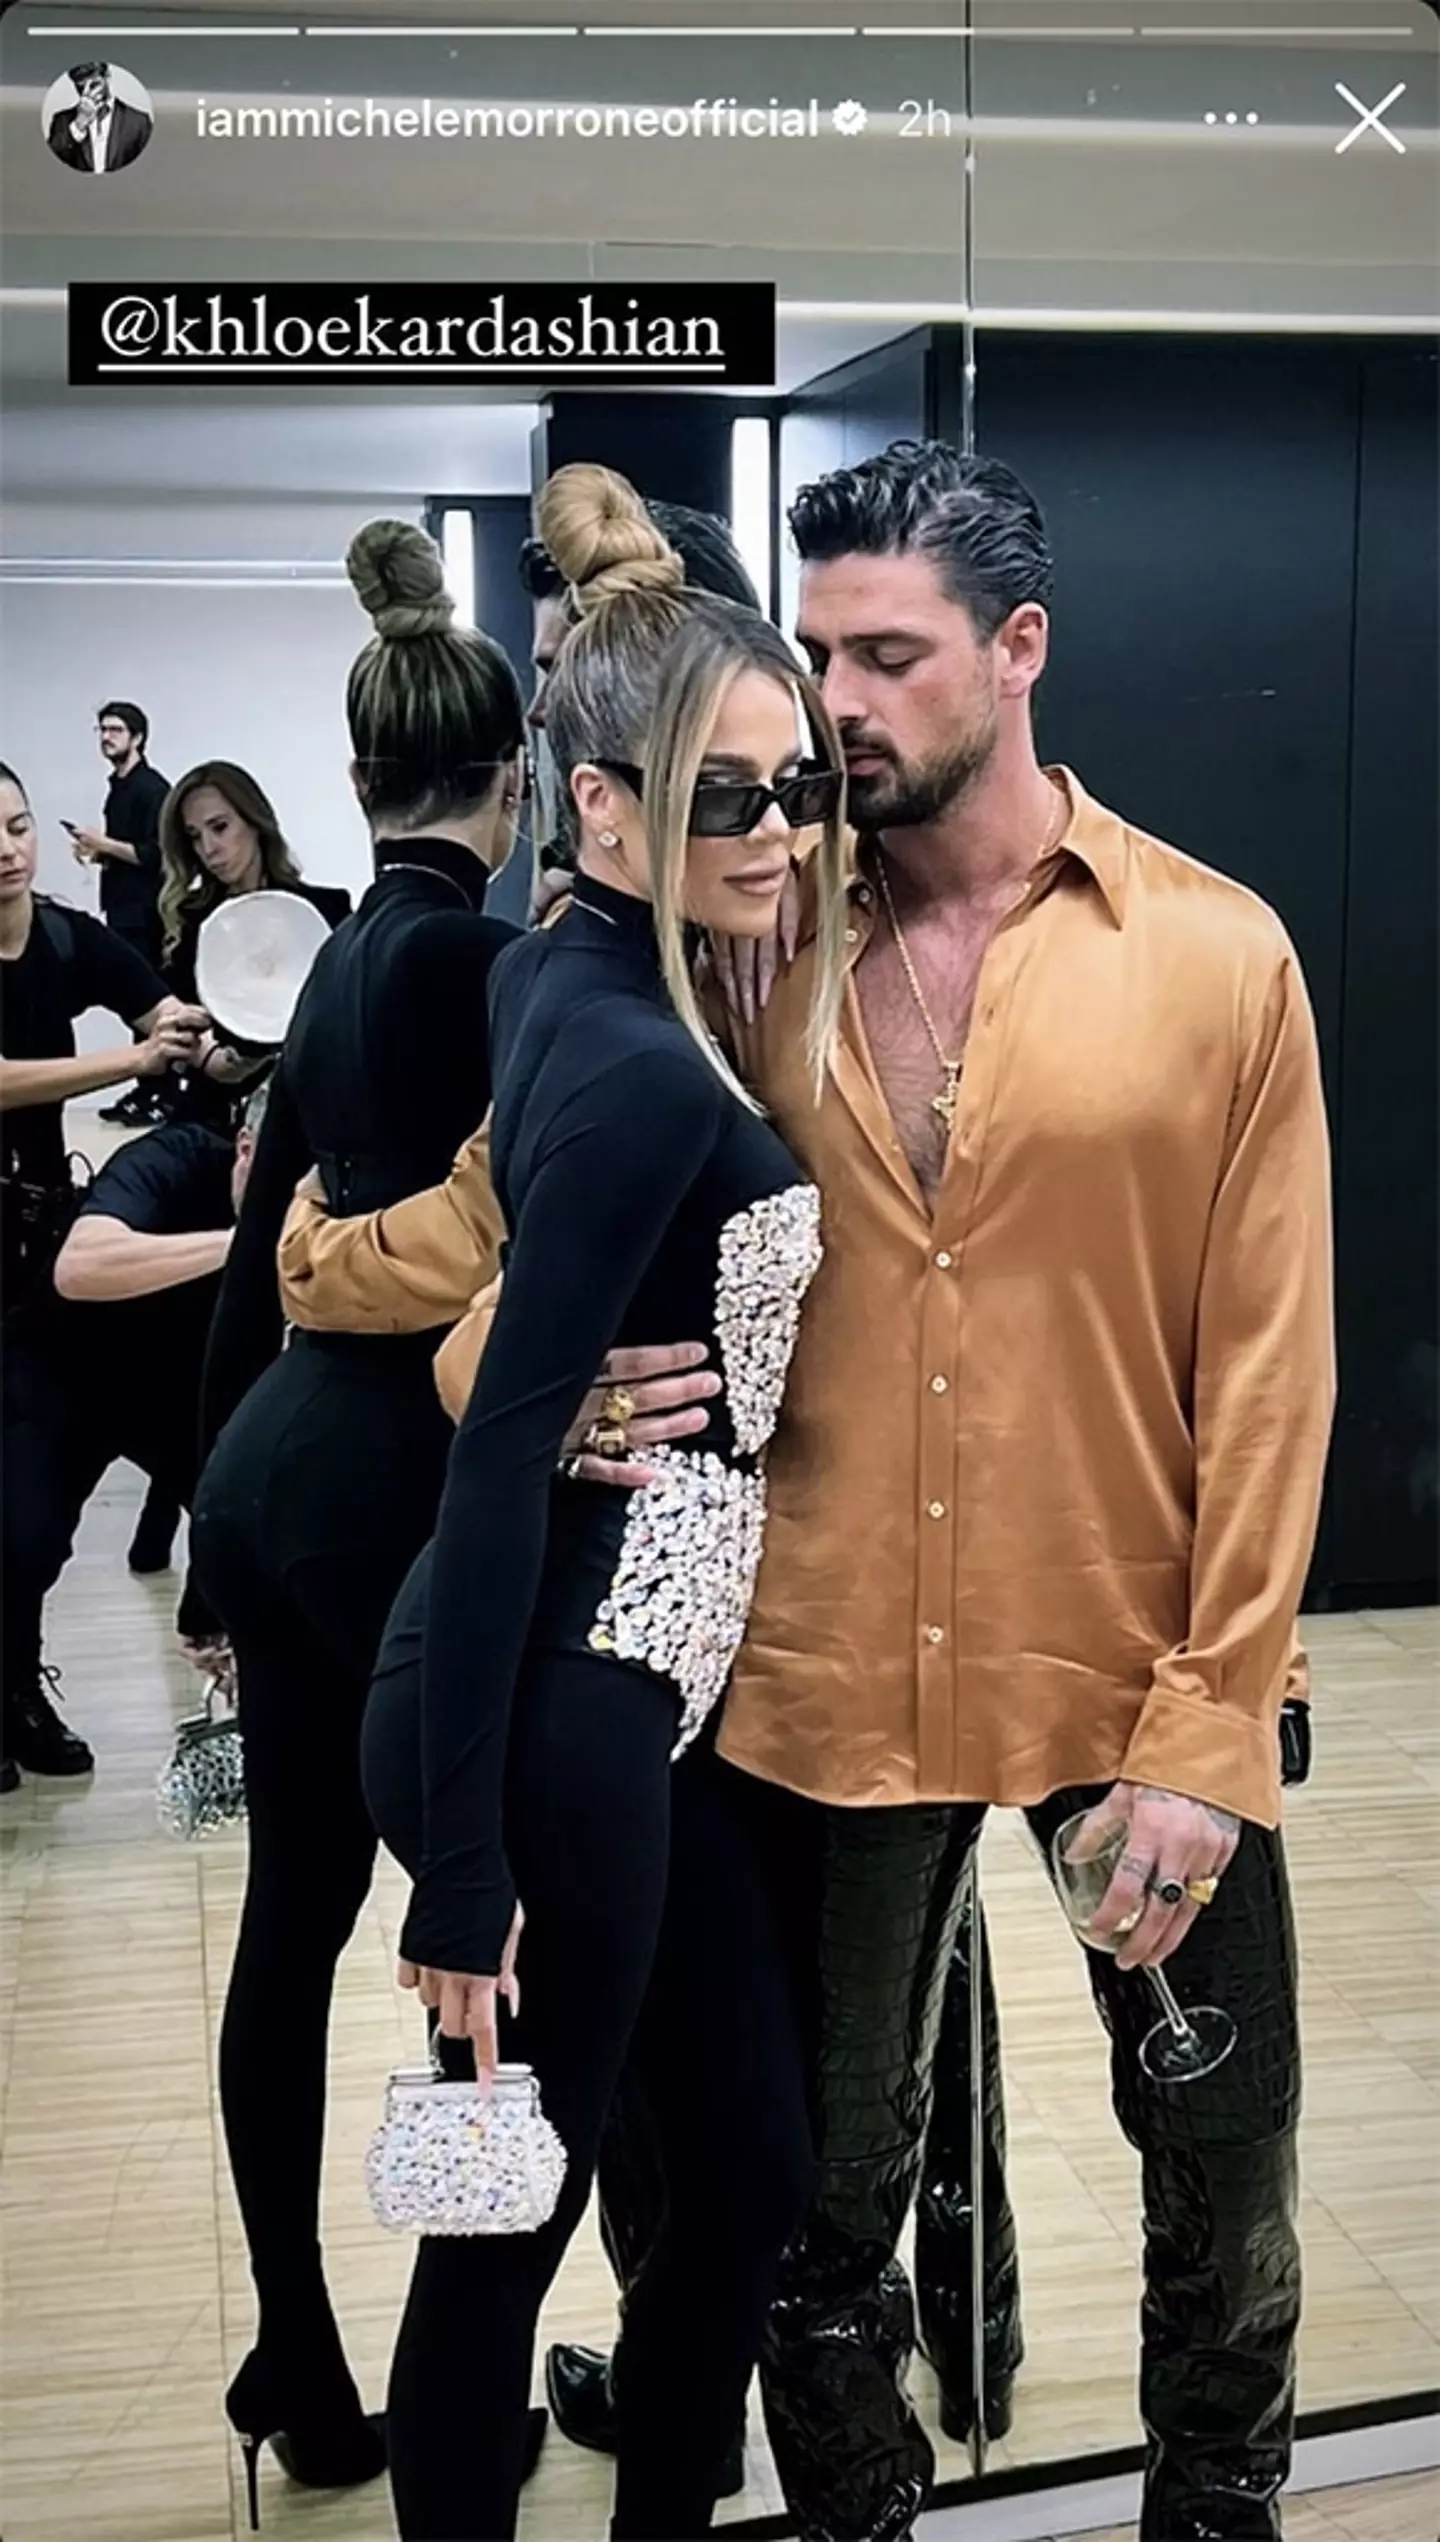 Michele Morrone and Khloé Kardashian were pictured together.